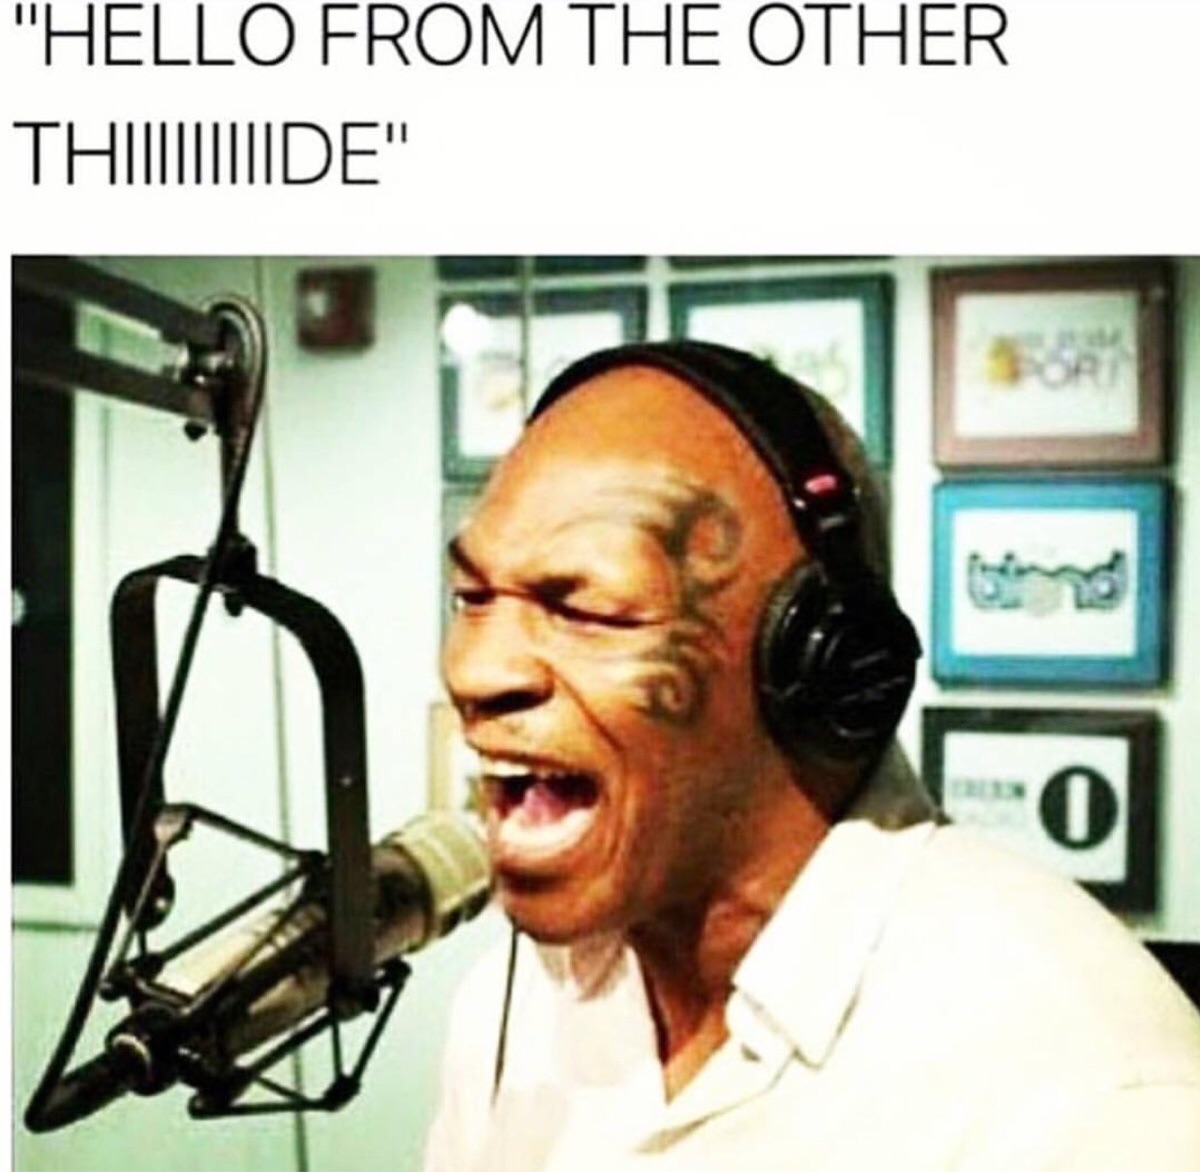 memes - mike tyson album meme - "Hello From The Other Thide"